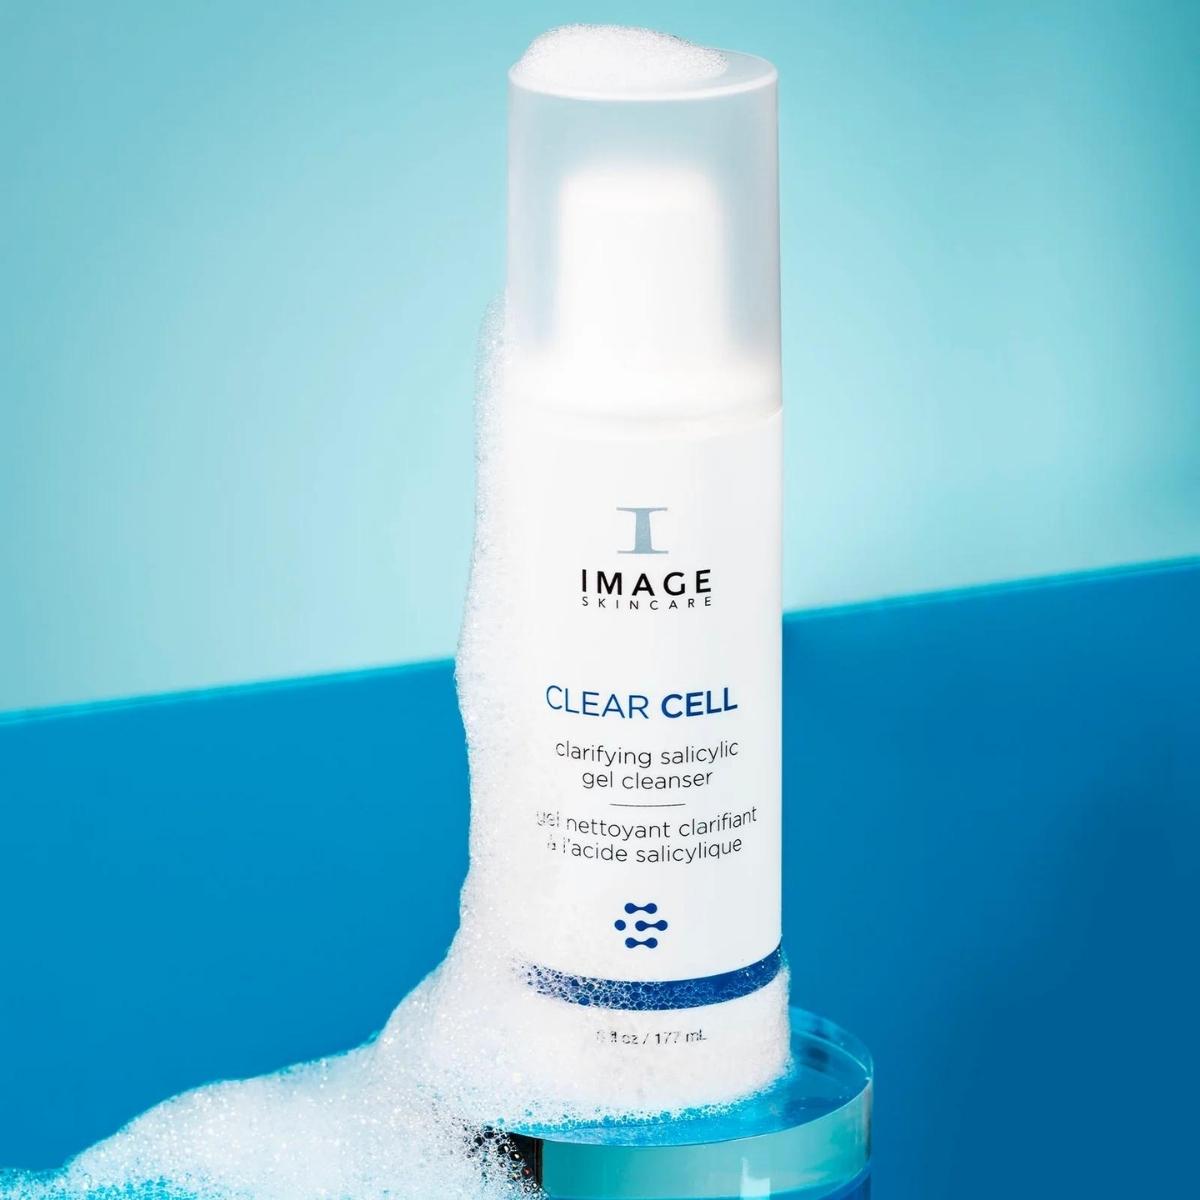 IMAGE Skincare Clear Cell Clarifying Salicylic Gel Cleanser